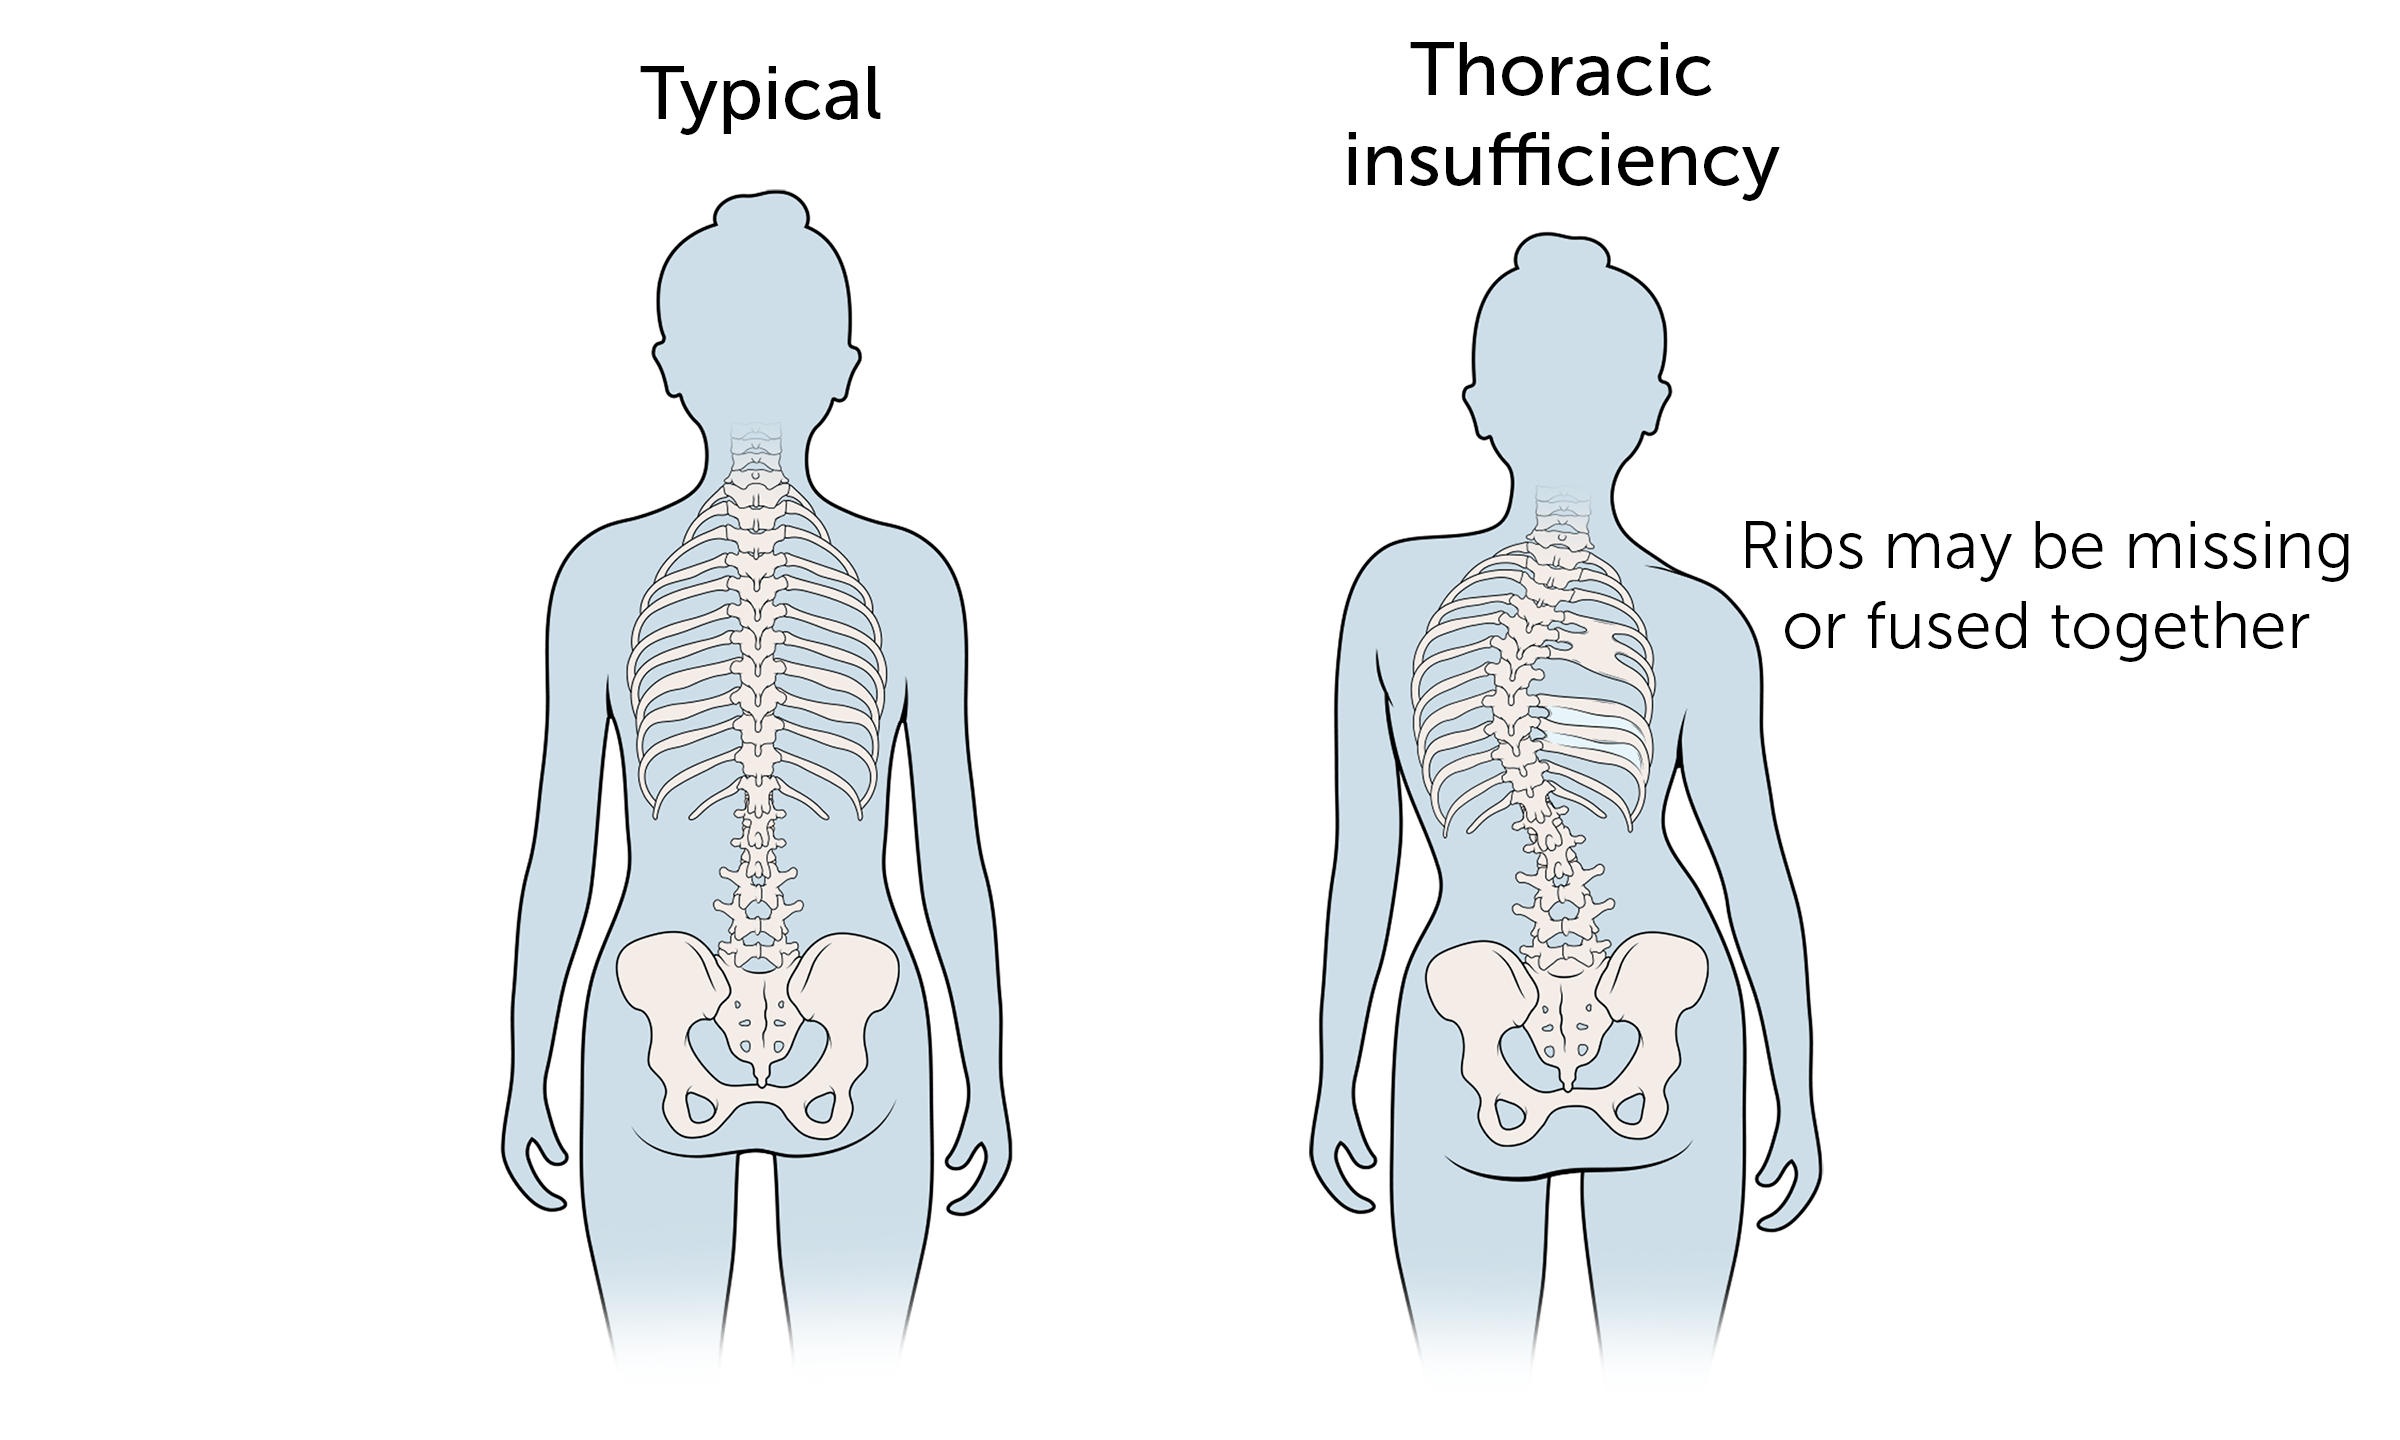 This is a typical skeleton and one with thoracic insufficiency syndrome.